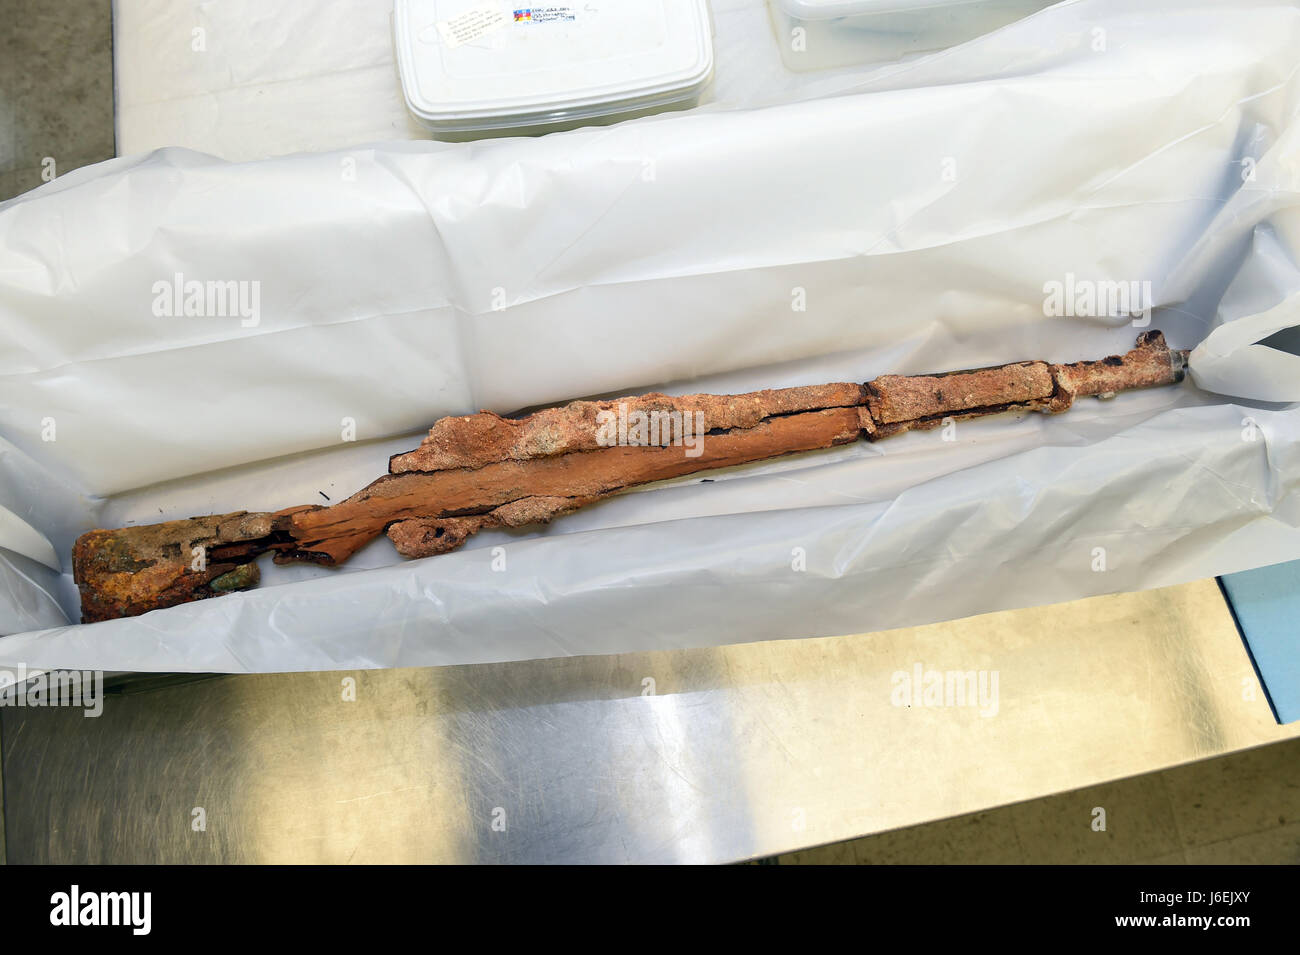 160817-N-PM781-002 WASHINGTON (Aug. 17, 2016) An M1 Garand rifle used by U.S. Marine Corps Raiders during the World War II attack on Japanese military forces on Makin Island is at Naval History and Heritage Command’s (NHHC) Underwater Archaeology Branch. Due to the rifle’s significant surface concretions, corrosion and other physical damage, NHHC Underwater Archaeology Branch is performing an assessment of the artifacts stability. (U.S. Navy photo by Arif Patani/Released) Stock Photo